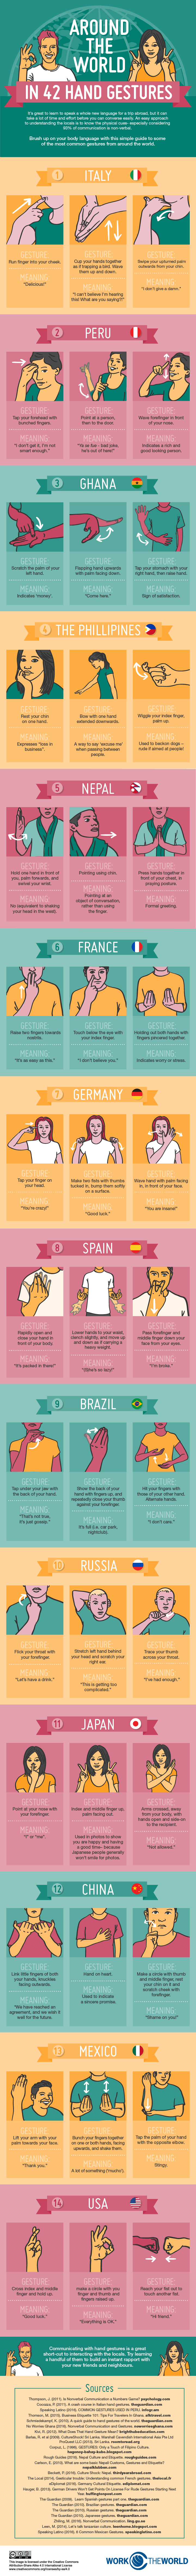 Around The World In 42 Hand Gestures Work The World Read it carefully, cause some of them might save you from getting into hot water in foreign countries. around the world in 42 hand gestures